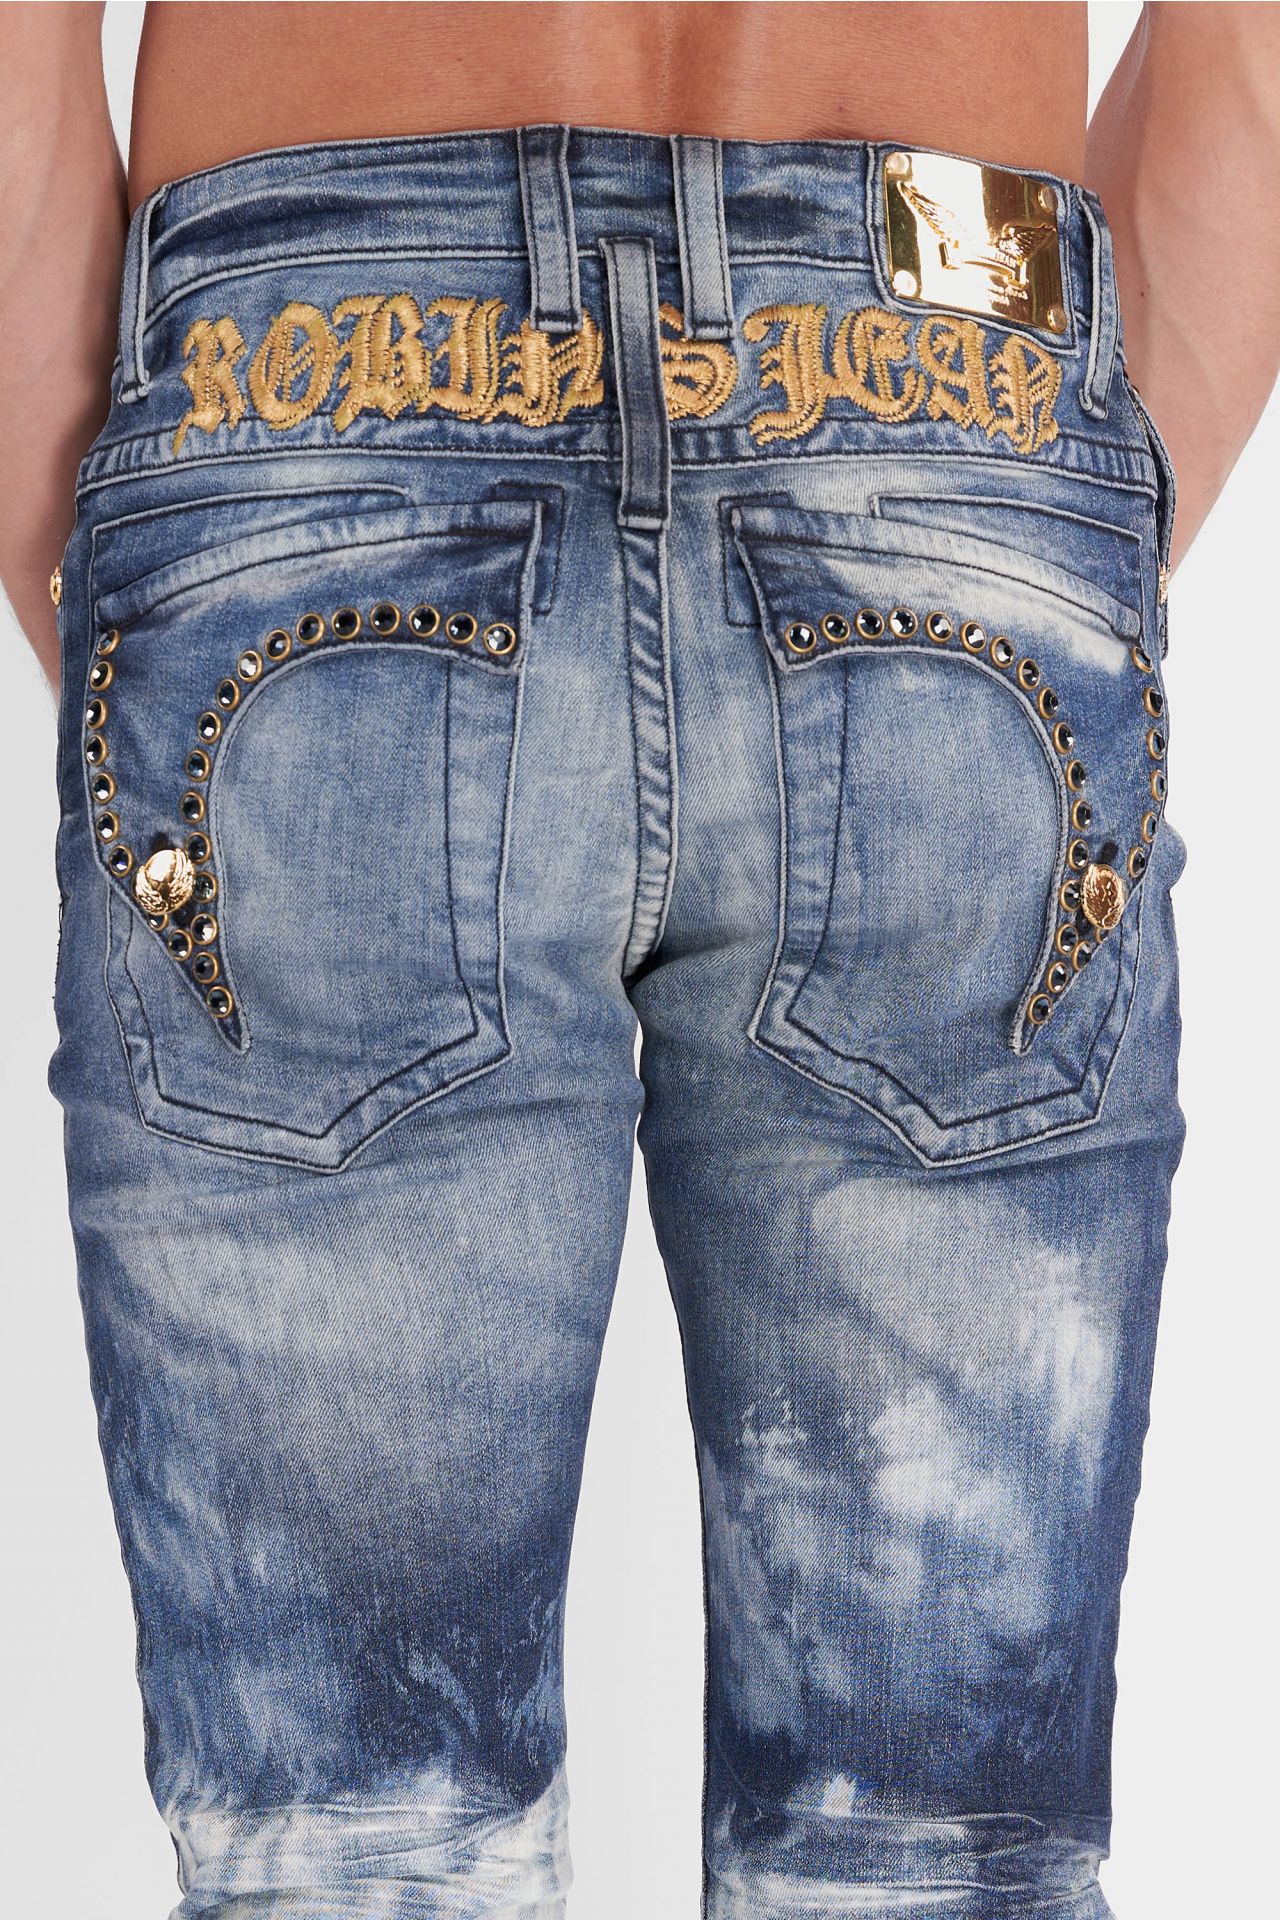 KILLER FLAP SKINNY MENS JEANS IN CLOUD JAPAN WASH WITH BLUE CRYSTALS